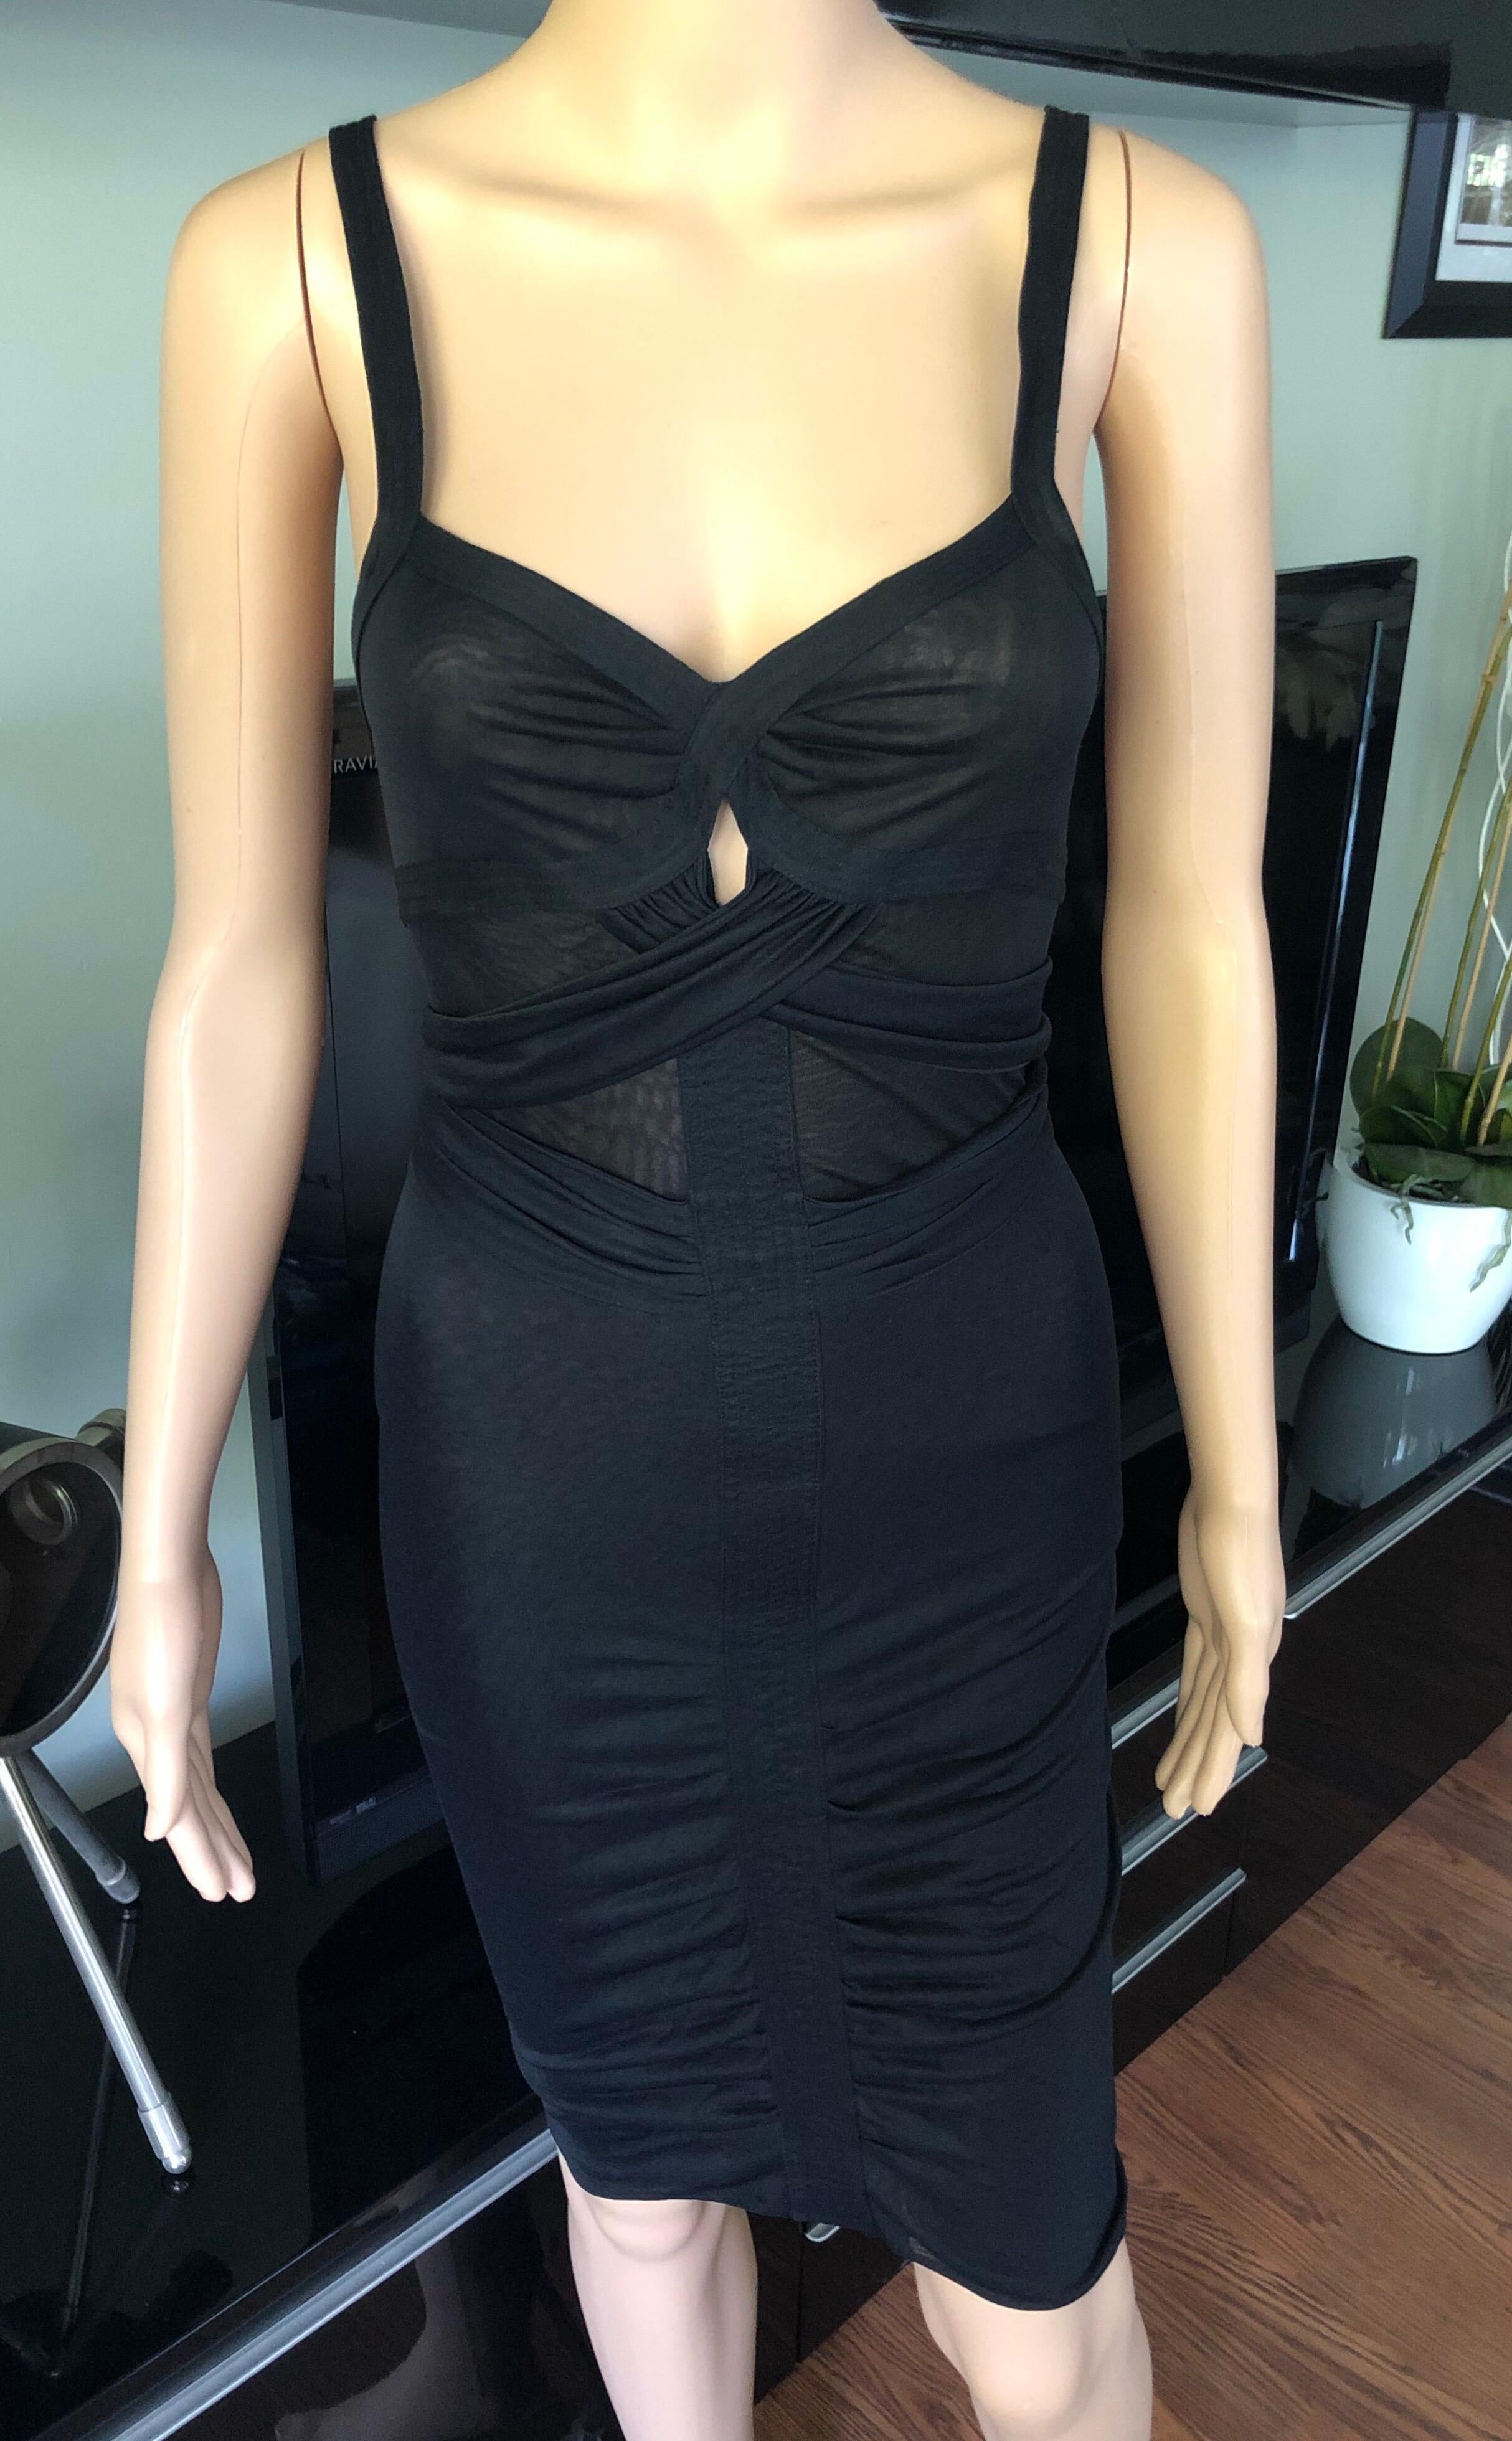 1990'S Gucci by Tom Ford Semi-Sheer Knit Bodycon Black Dress XS

Gucci semi-sheer lightweight stretch knit sleeveless dress featuring crossed accent at front and snap closures at back. 
